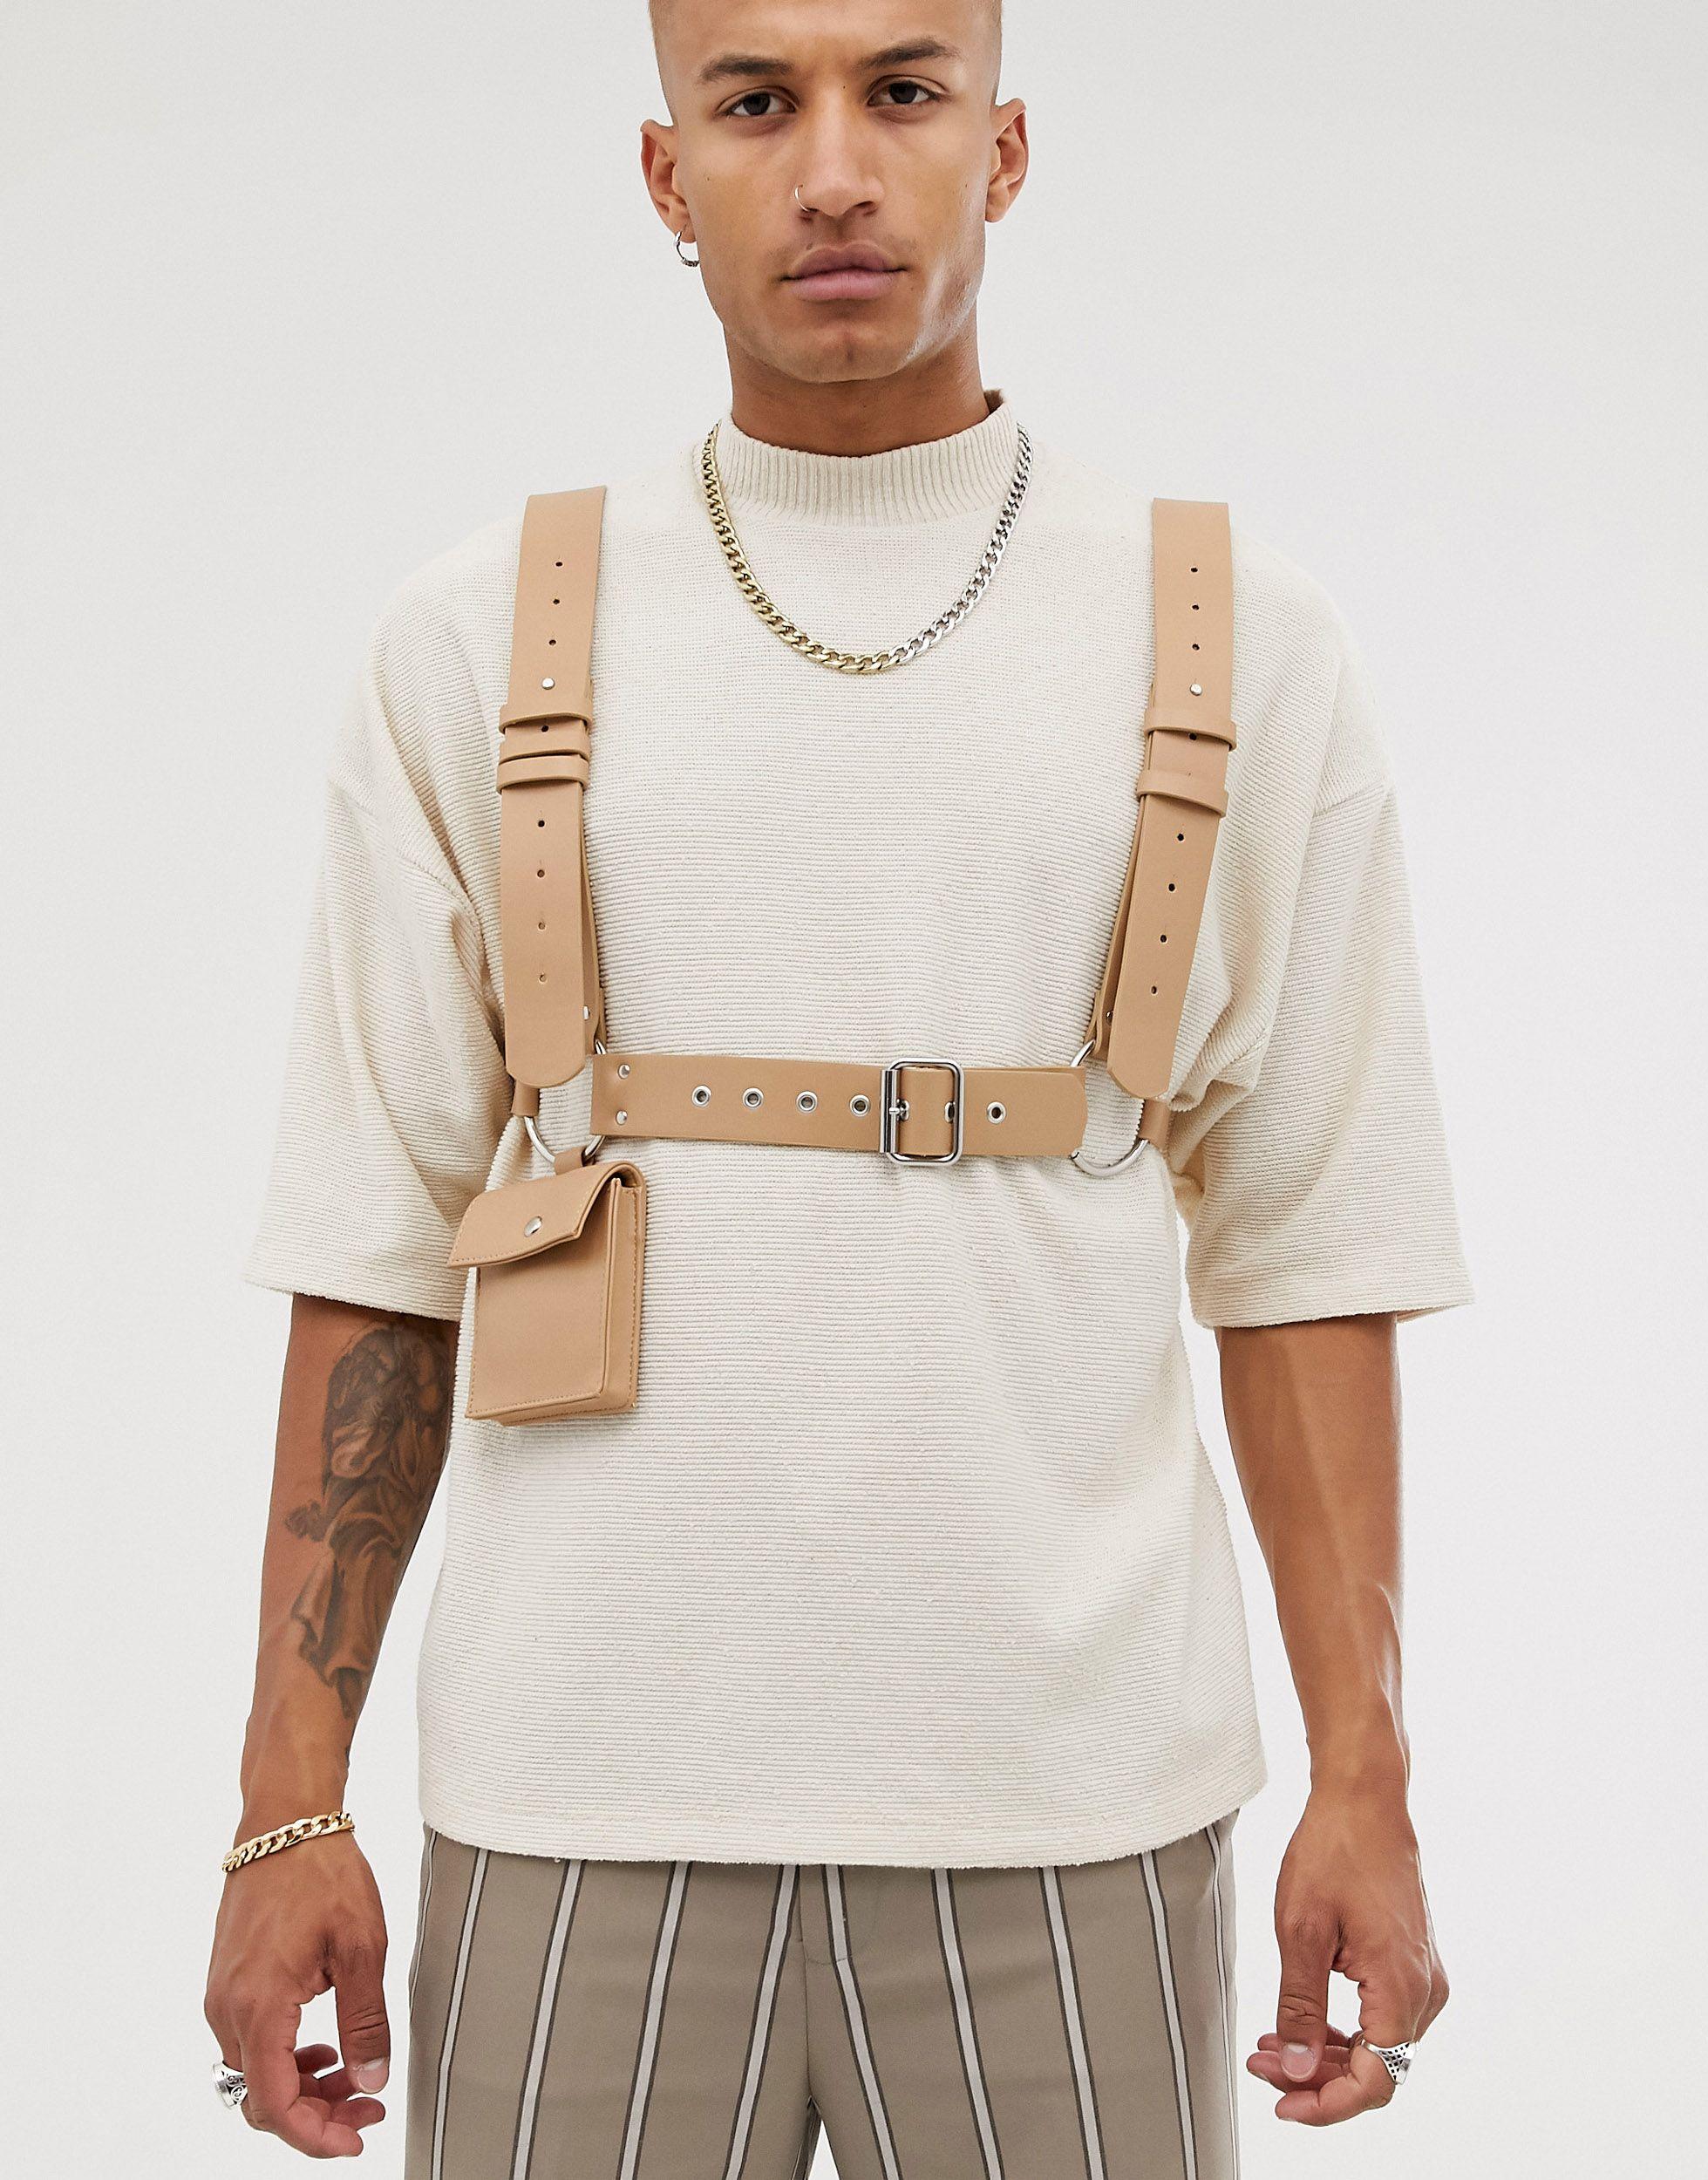 ASOS Body Harness in Natural for Men | Lyst